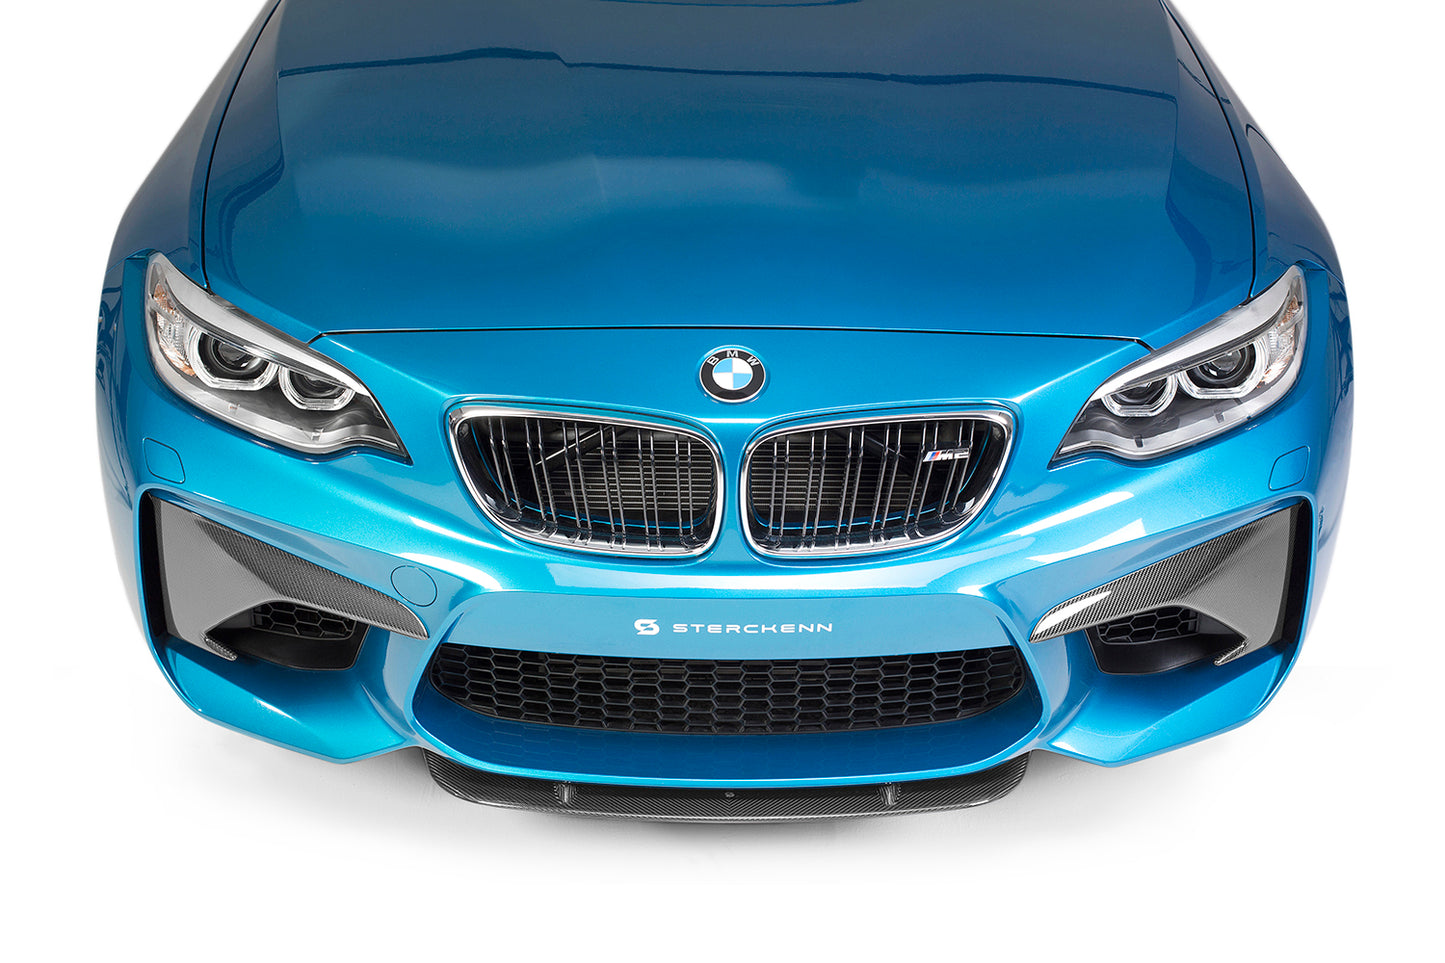 Top shot of the front bumper of a blue BMW M2 (F87) with a white background